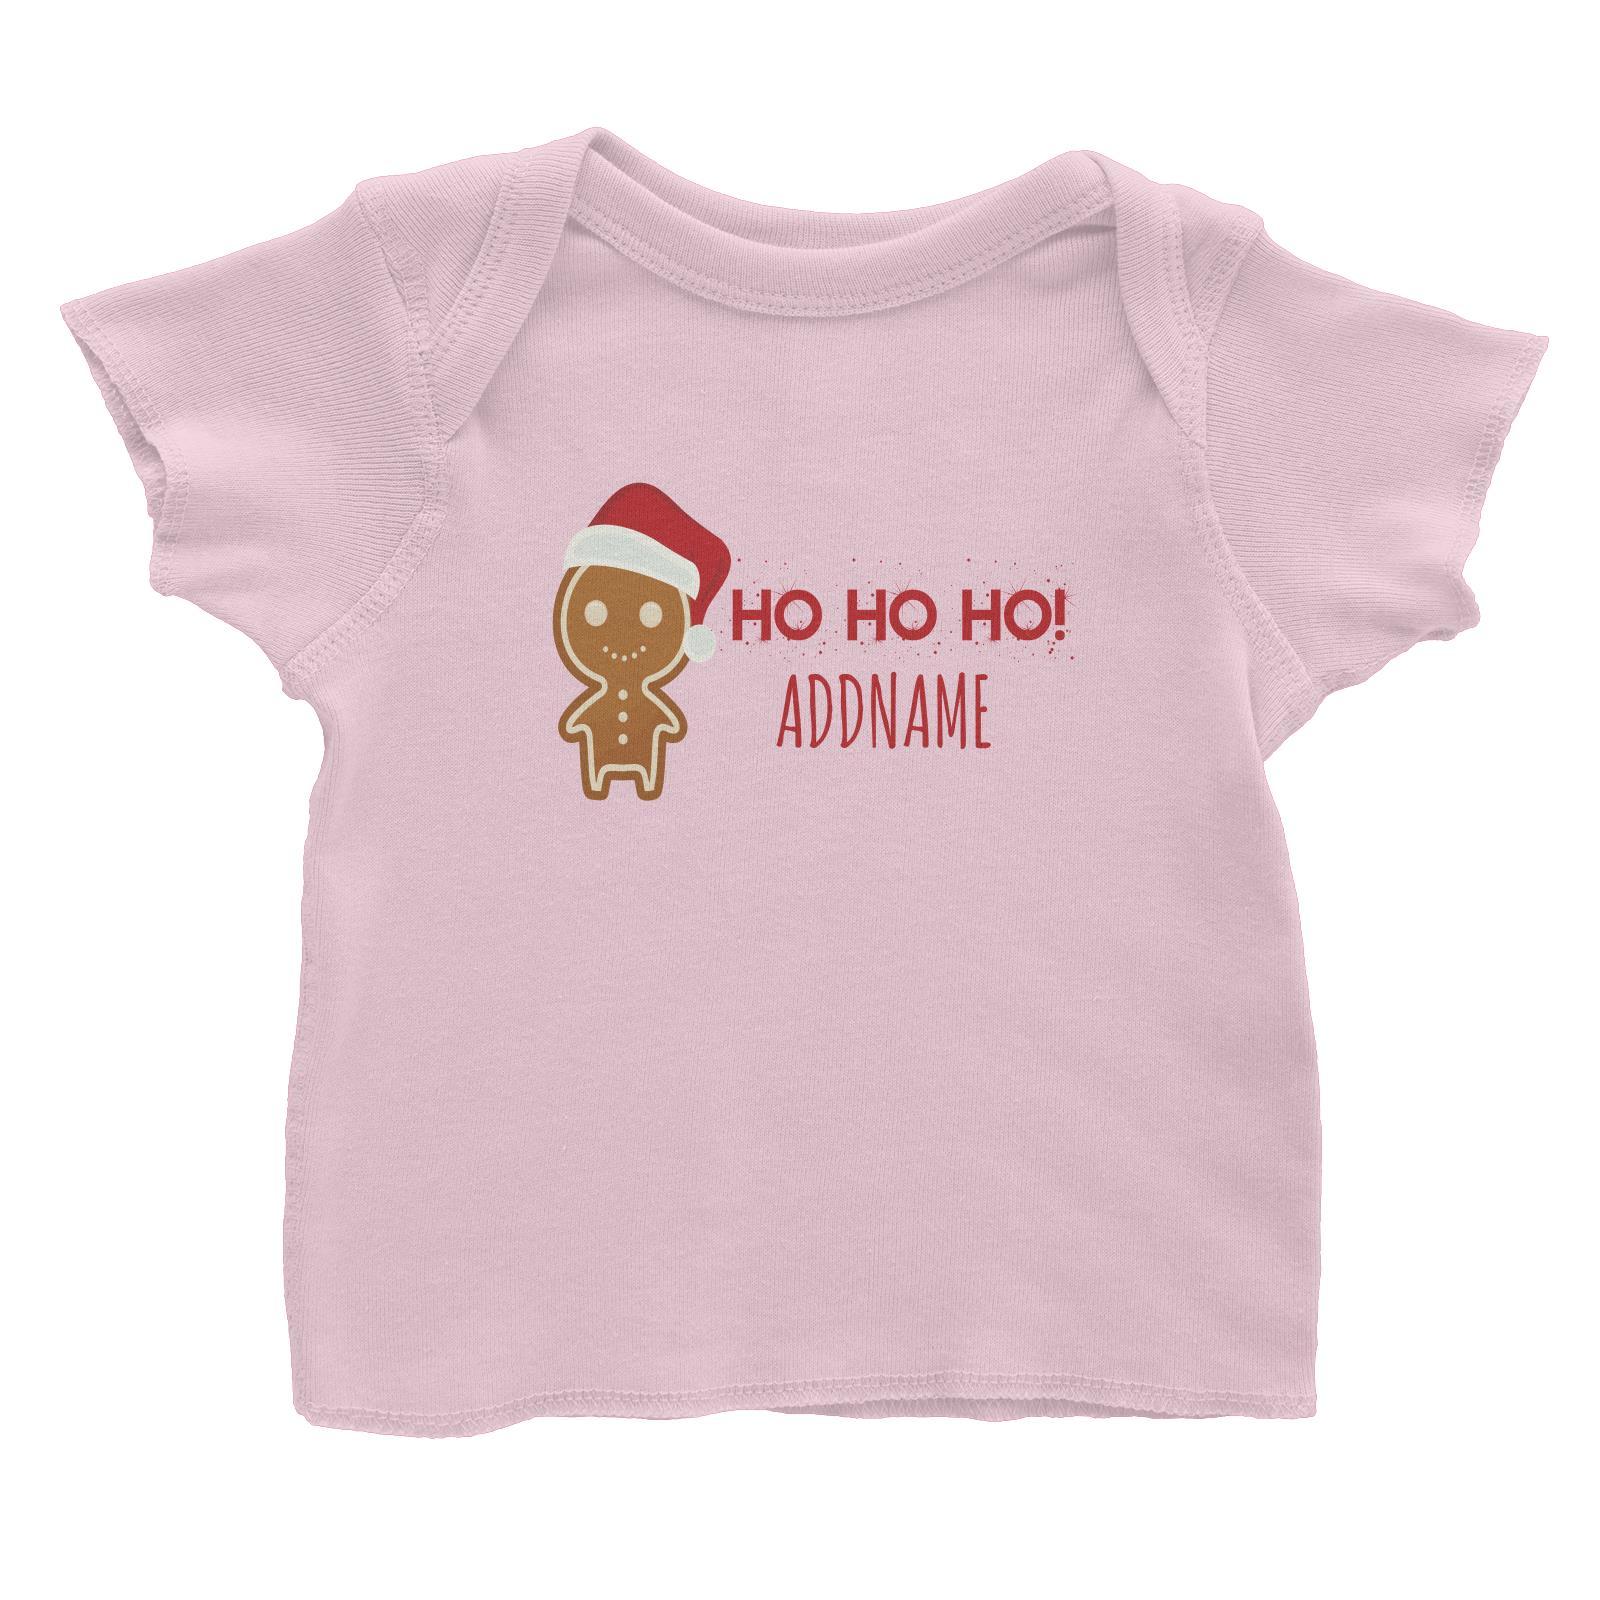 Cute Gingerbread Man with Santa Hat Addname Baby T-Shirt Christmas Matching Family Lettering Personalizable Designs